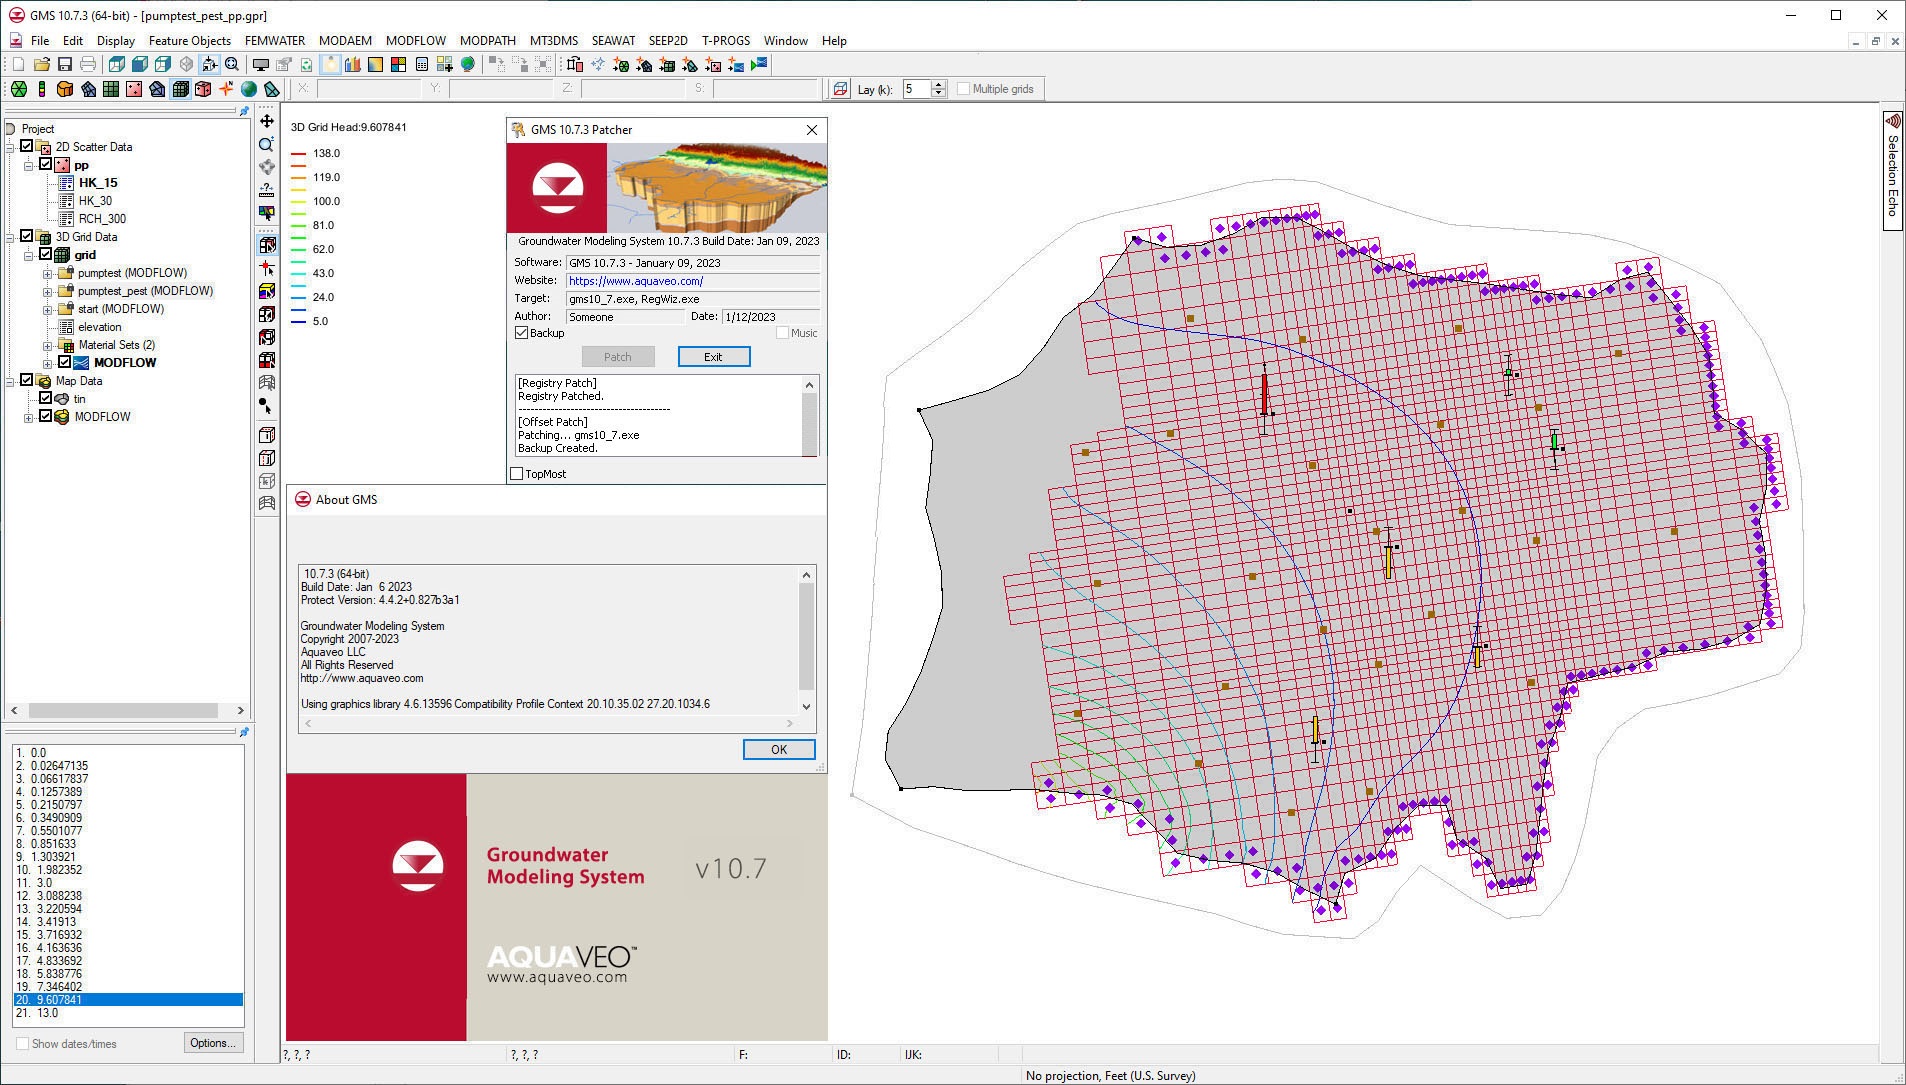 Working with Aquaveo Groundwater Modeling System Premium 10.7.3 full